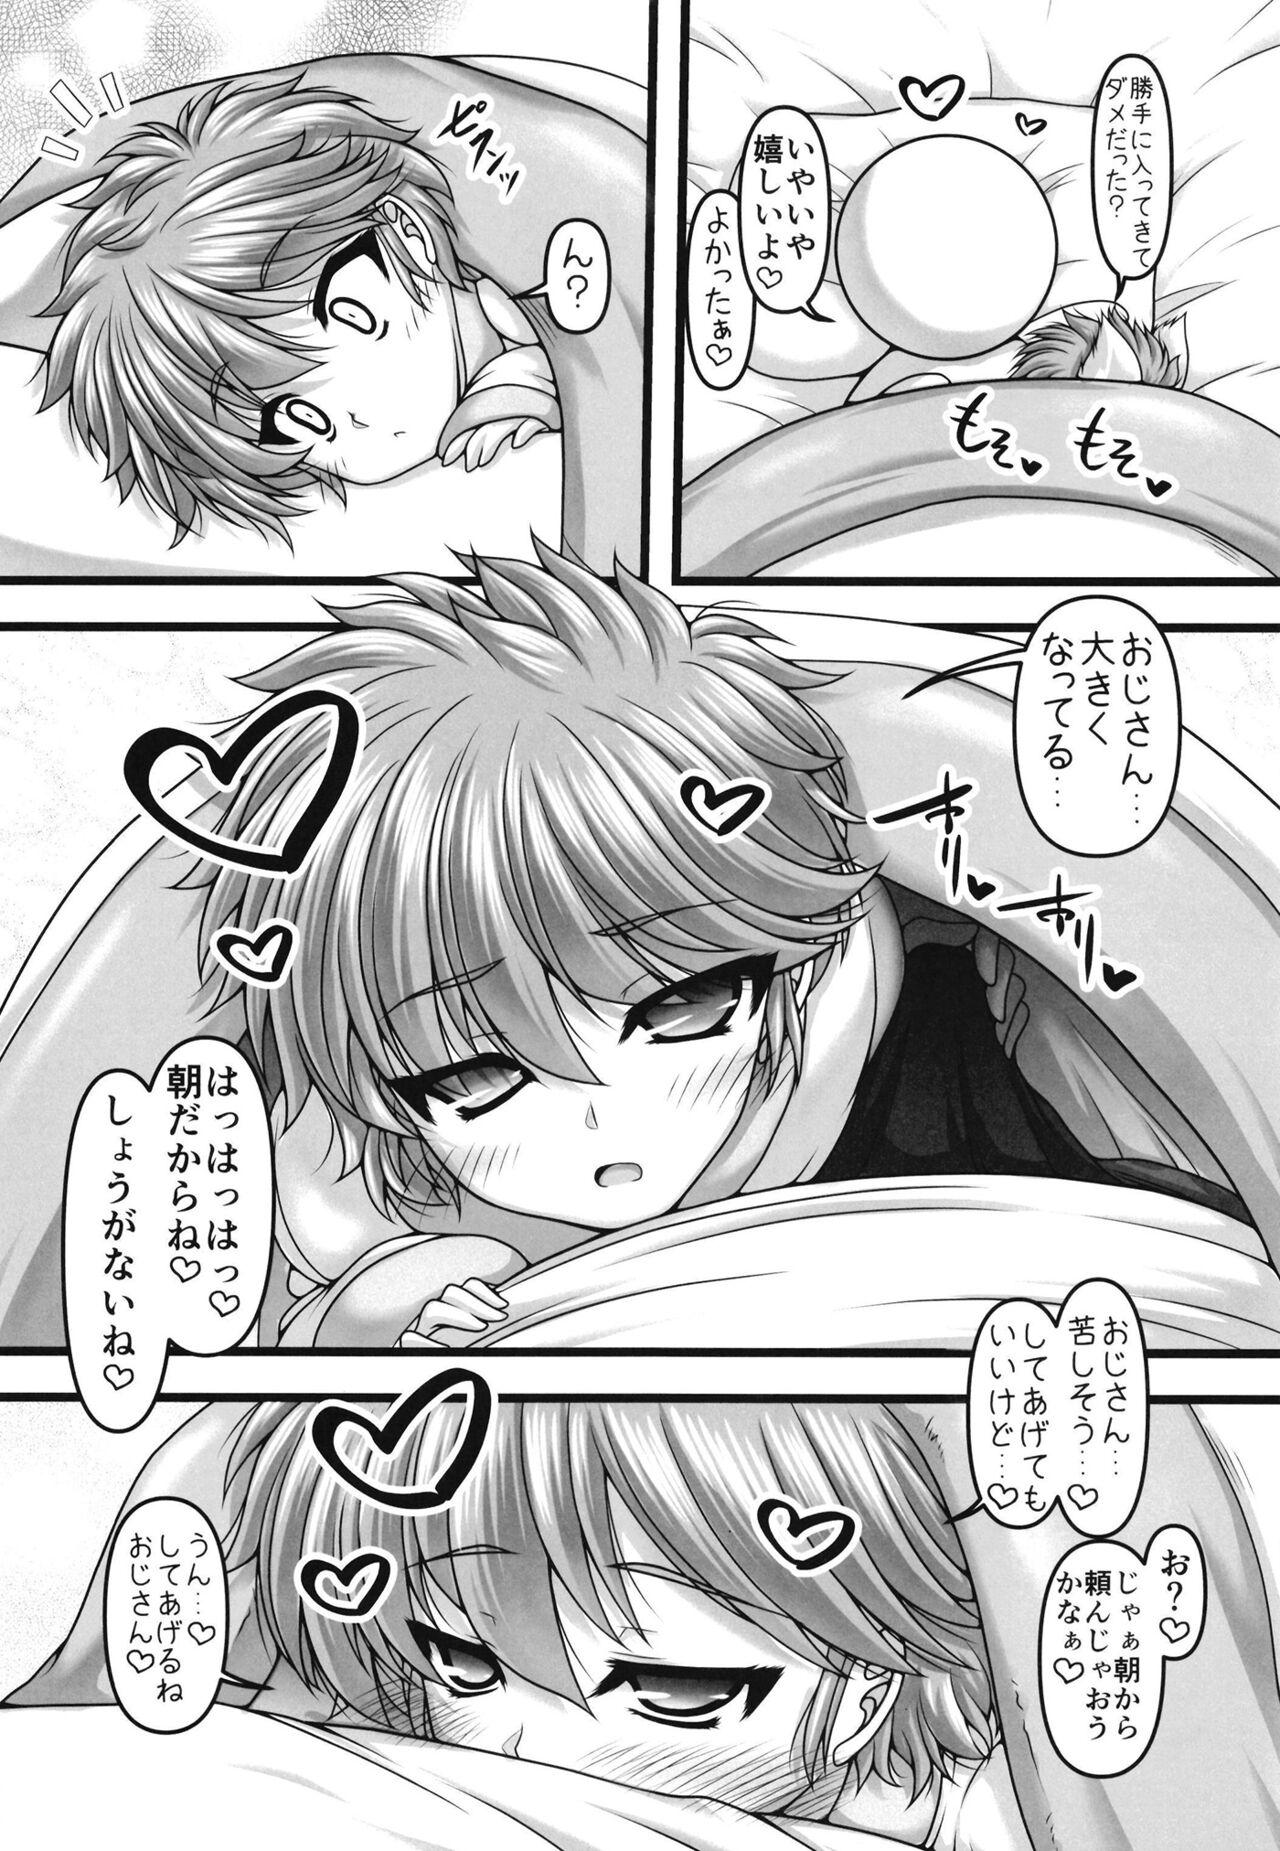 Older San-shoku paretto - Magic knight rayearth Best Blowjob Ever - Page 6